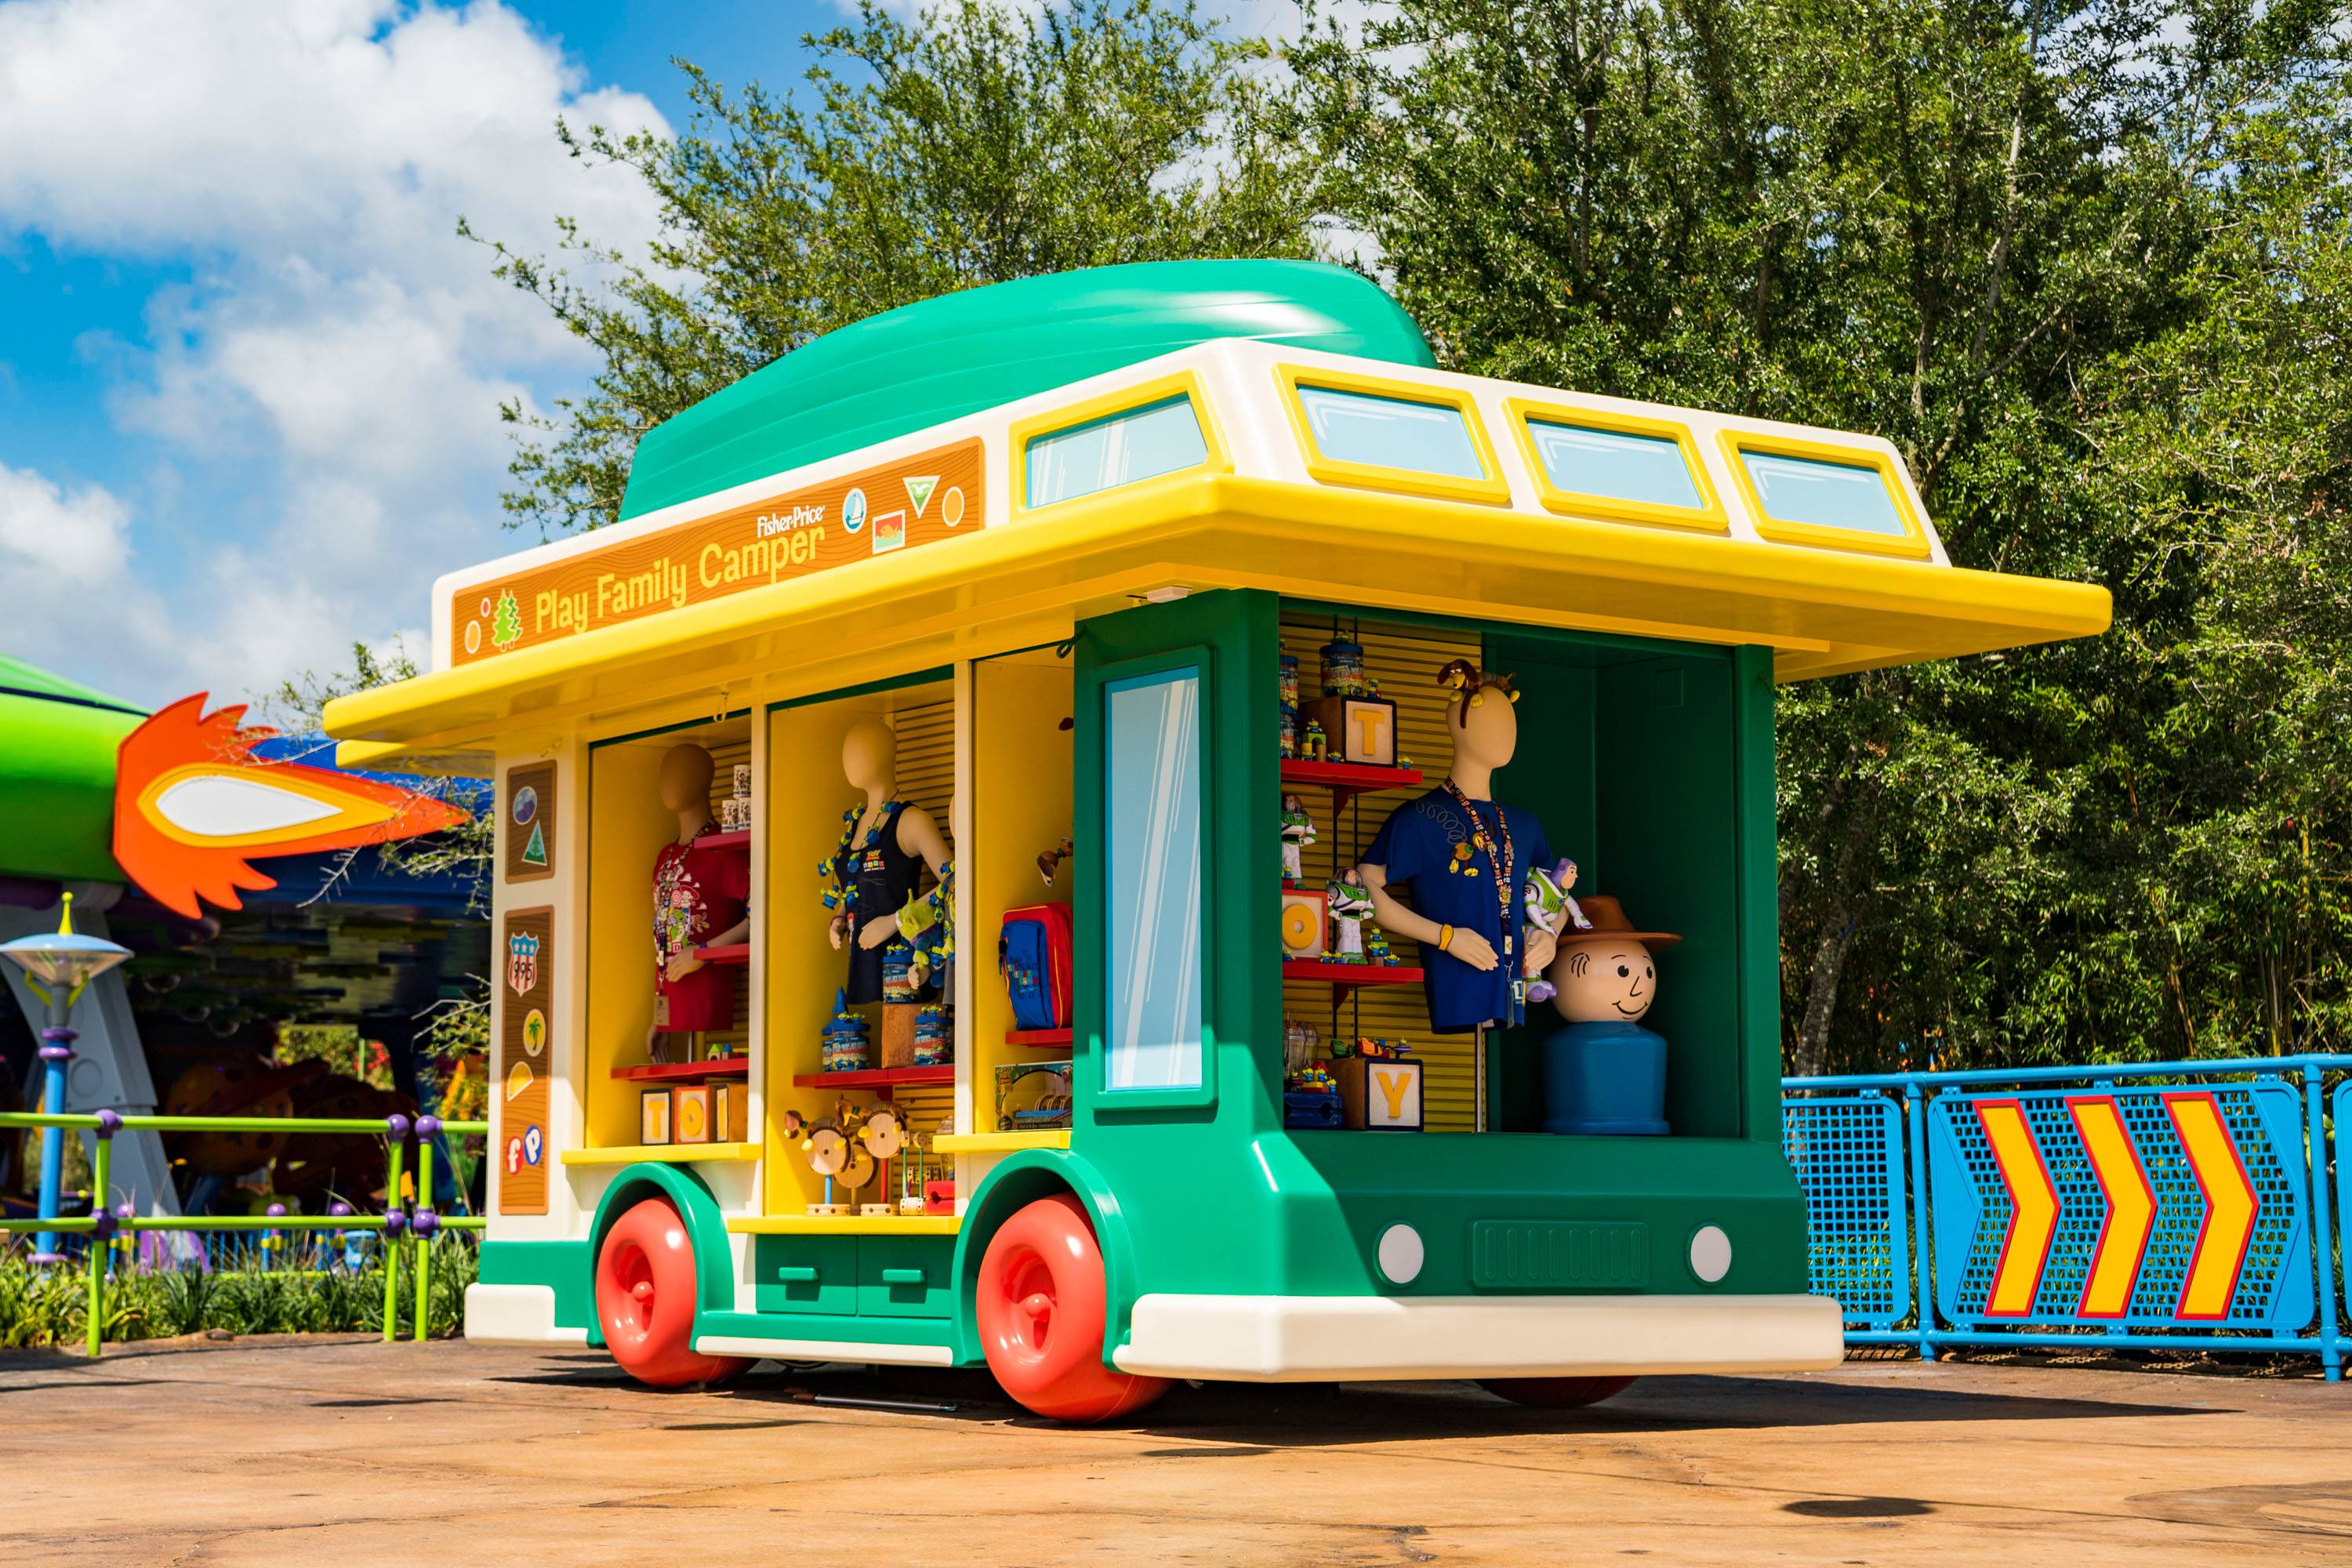 Merchandise kiosk at Toy Story Land